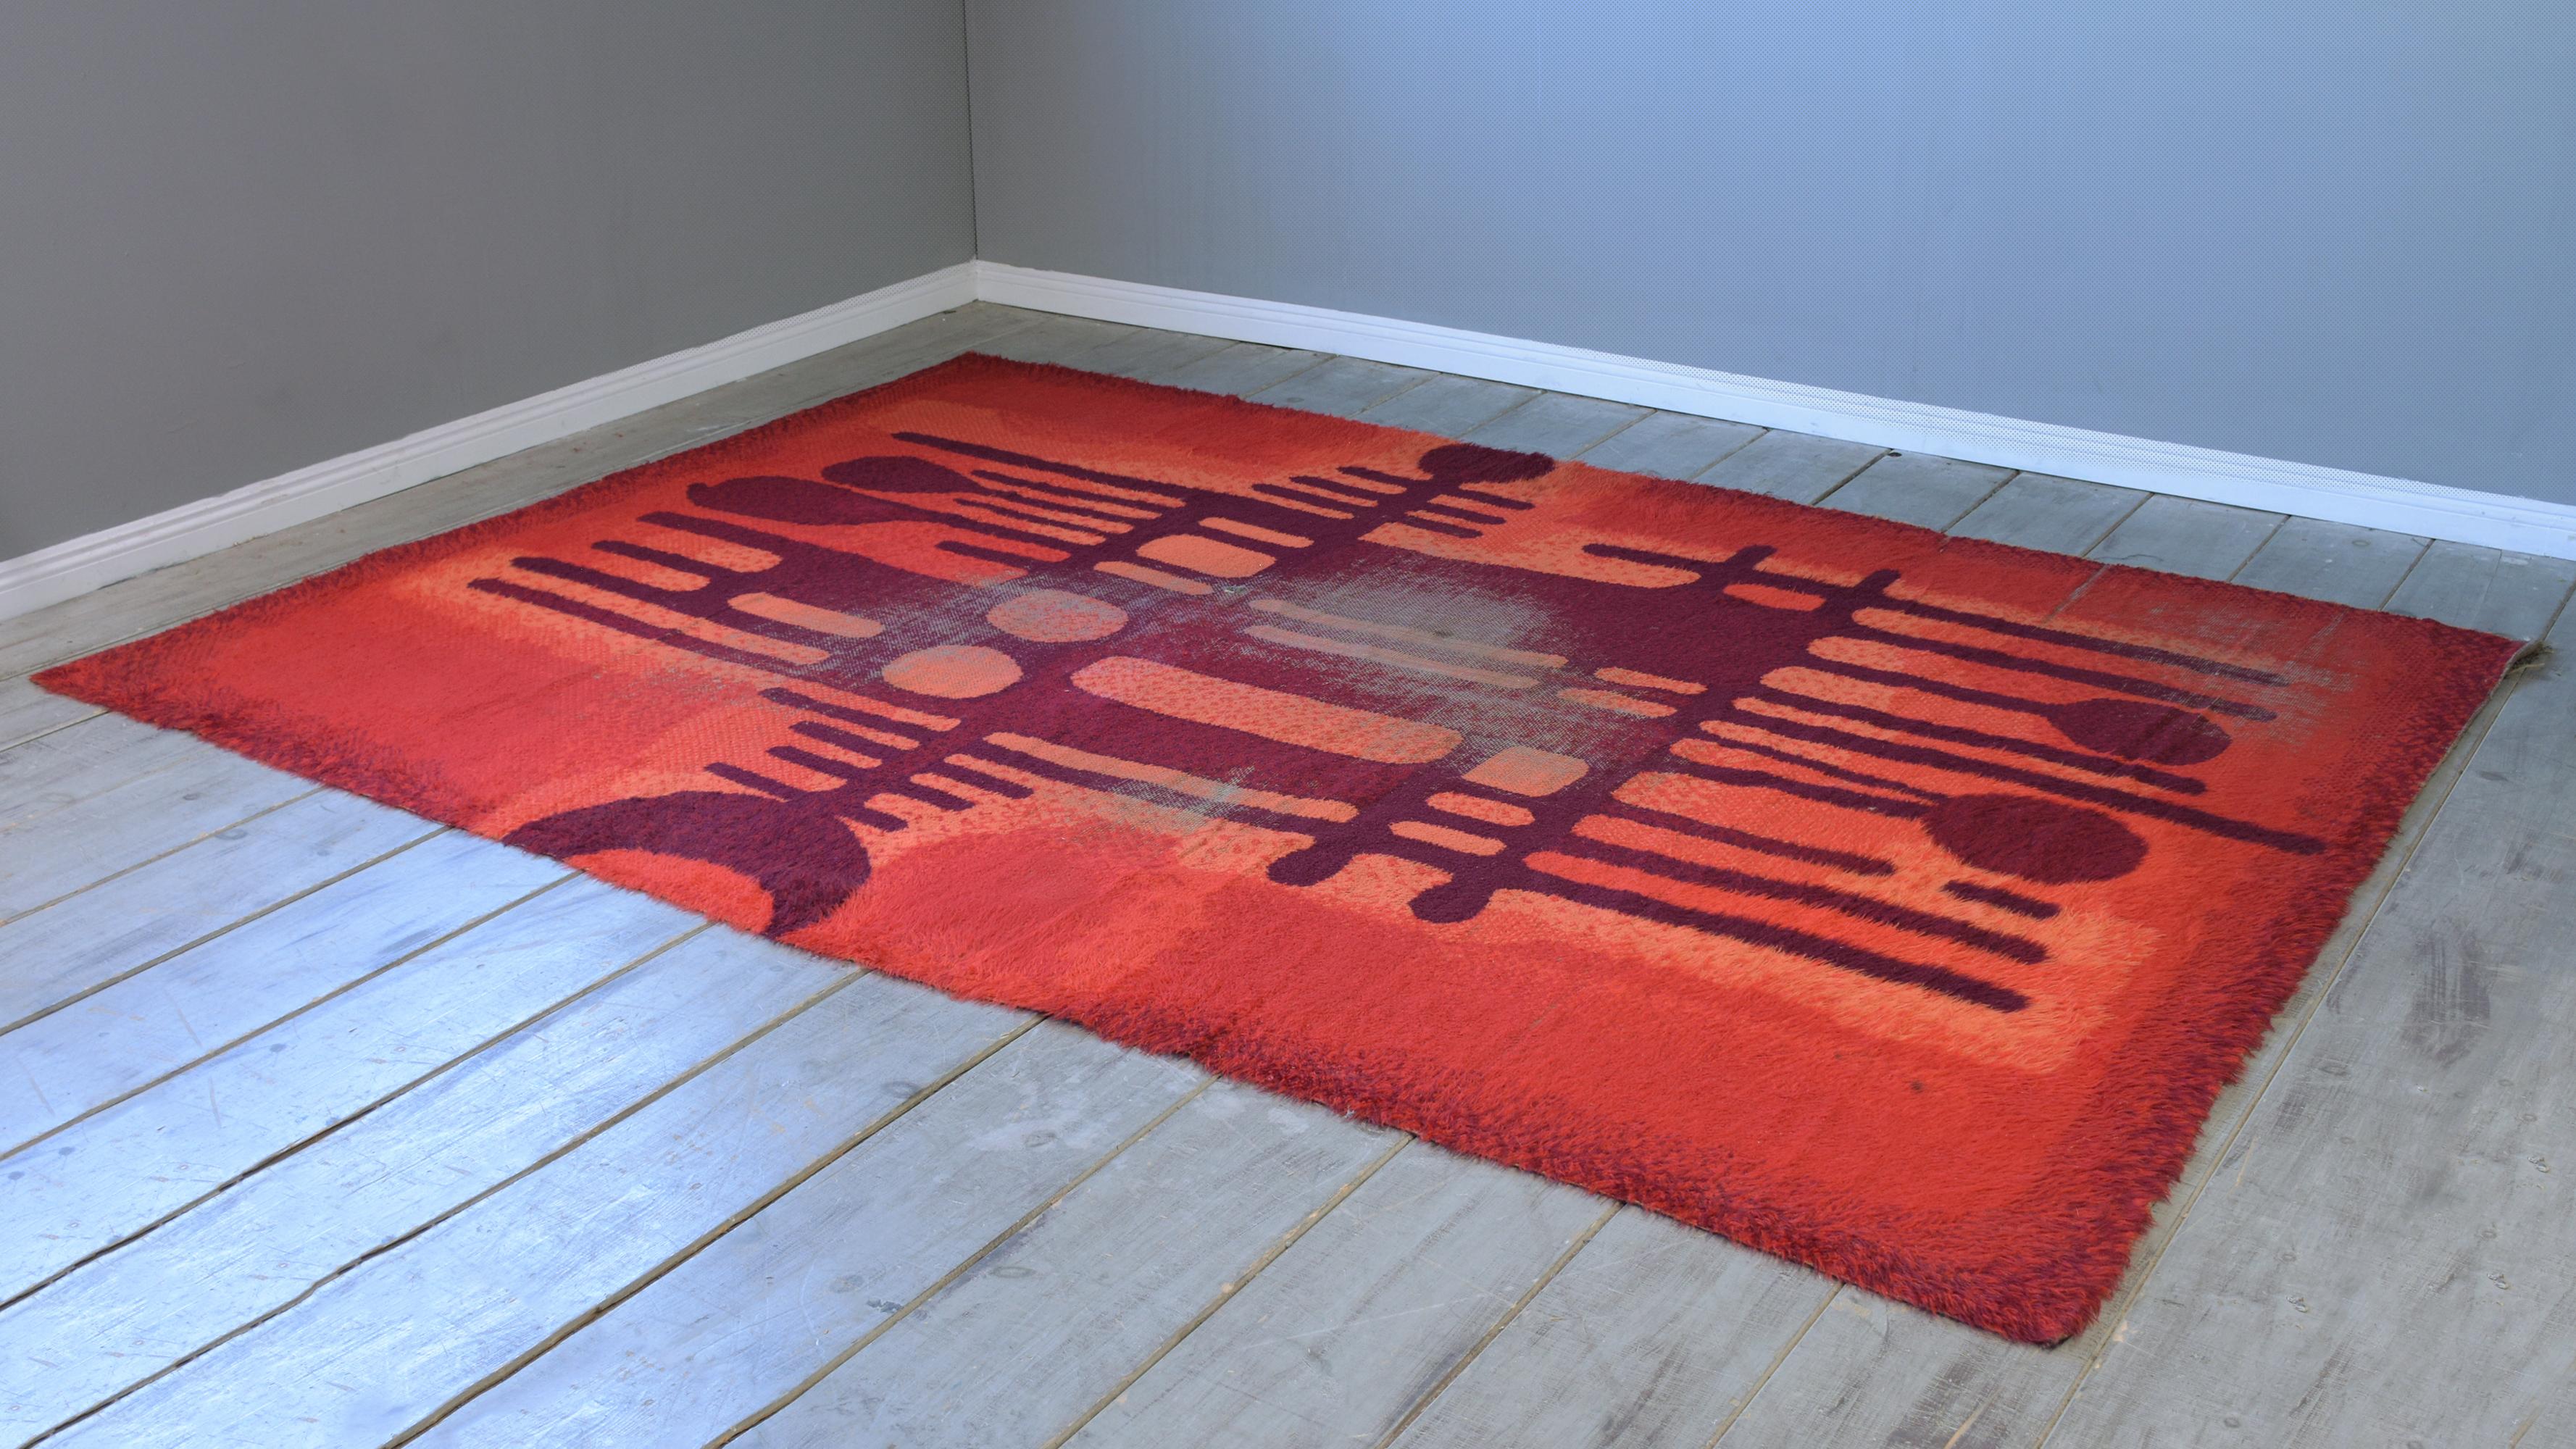 This vibrant Scandinavian fire pattern shag rug by Ege Rya has a thick wool pile, with vibrant colors in red, orange, pink, and brown colors. This vintage large carpet is sure to add some welcomed color to any inspired sophisticated home decor for